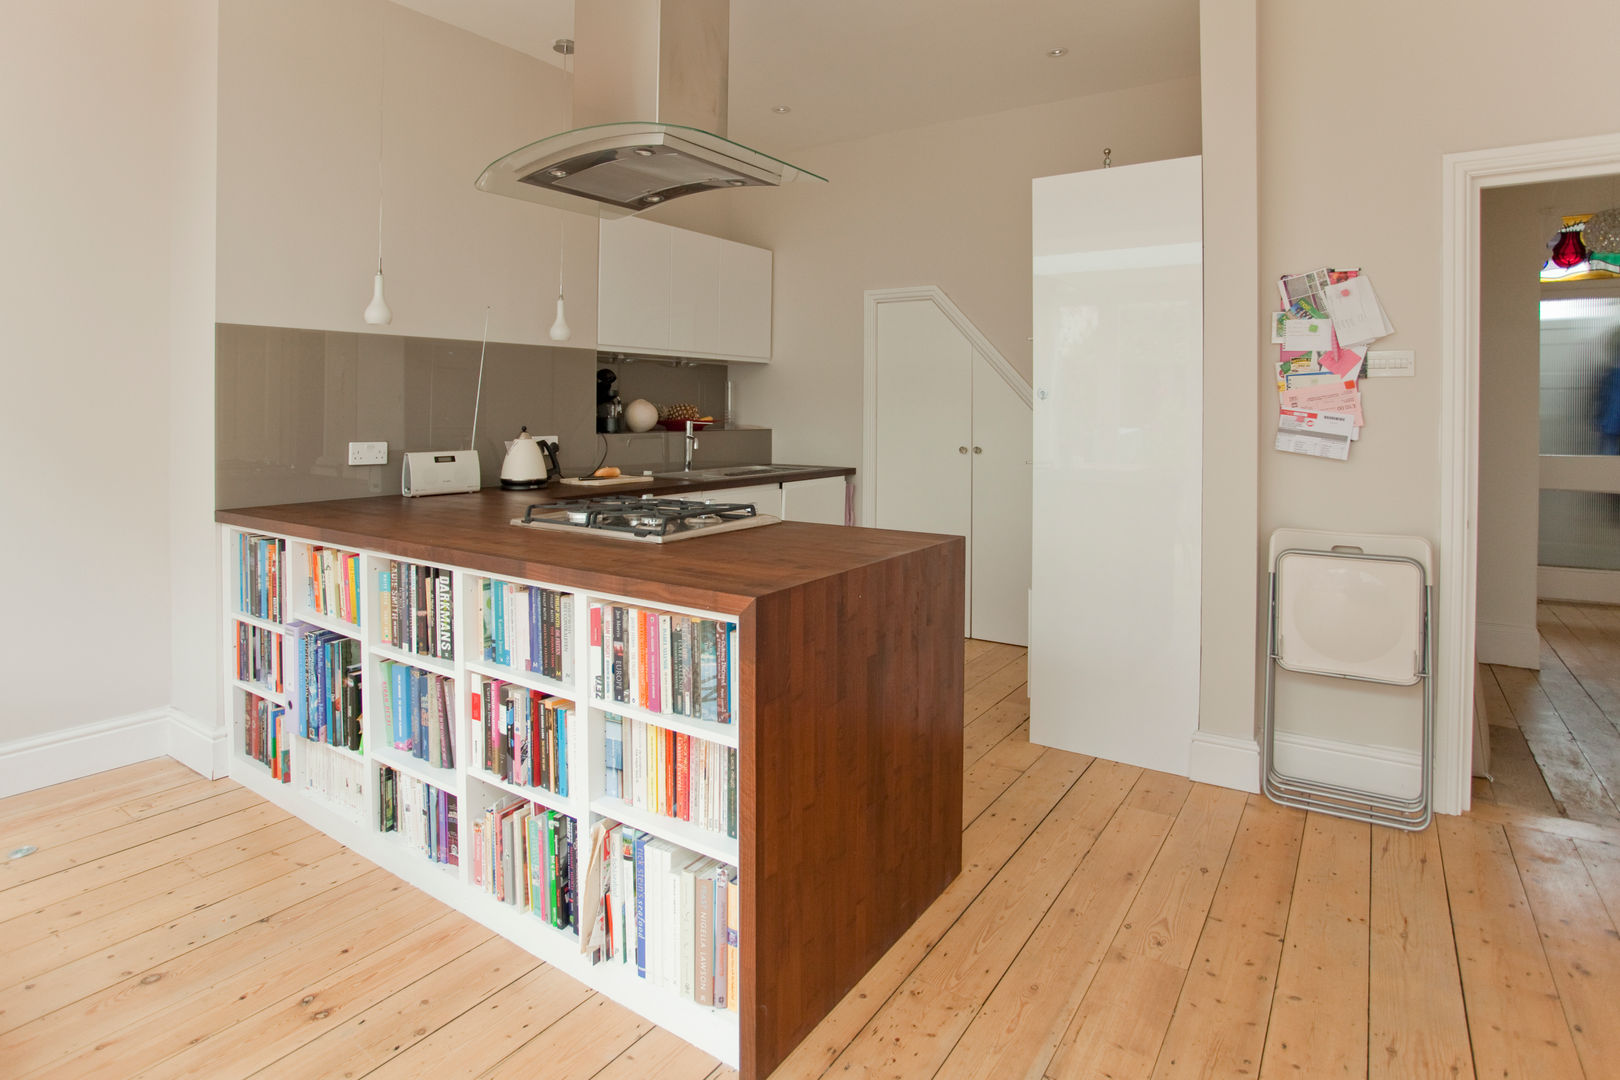 Rear extension and remodelling in Central Bristol Dittrich Hudson Vasetti Architects Cocinas modernas